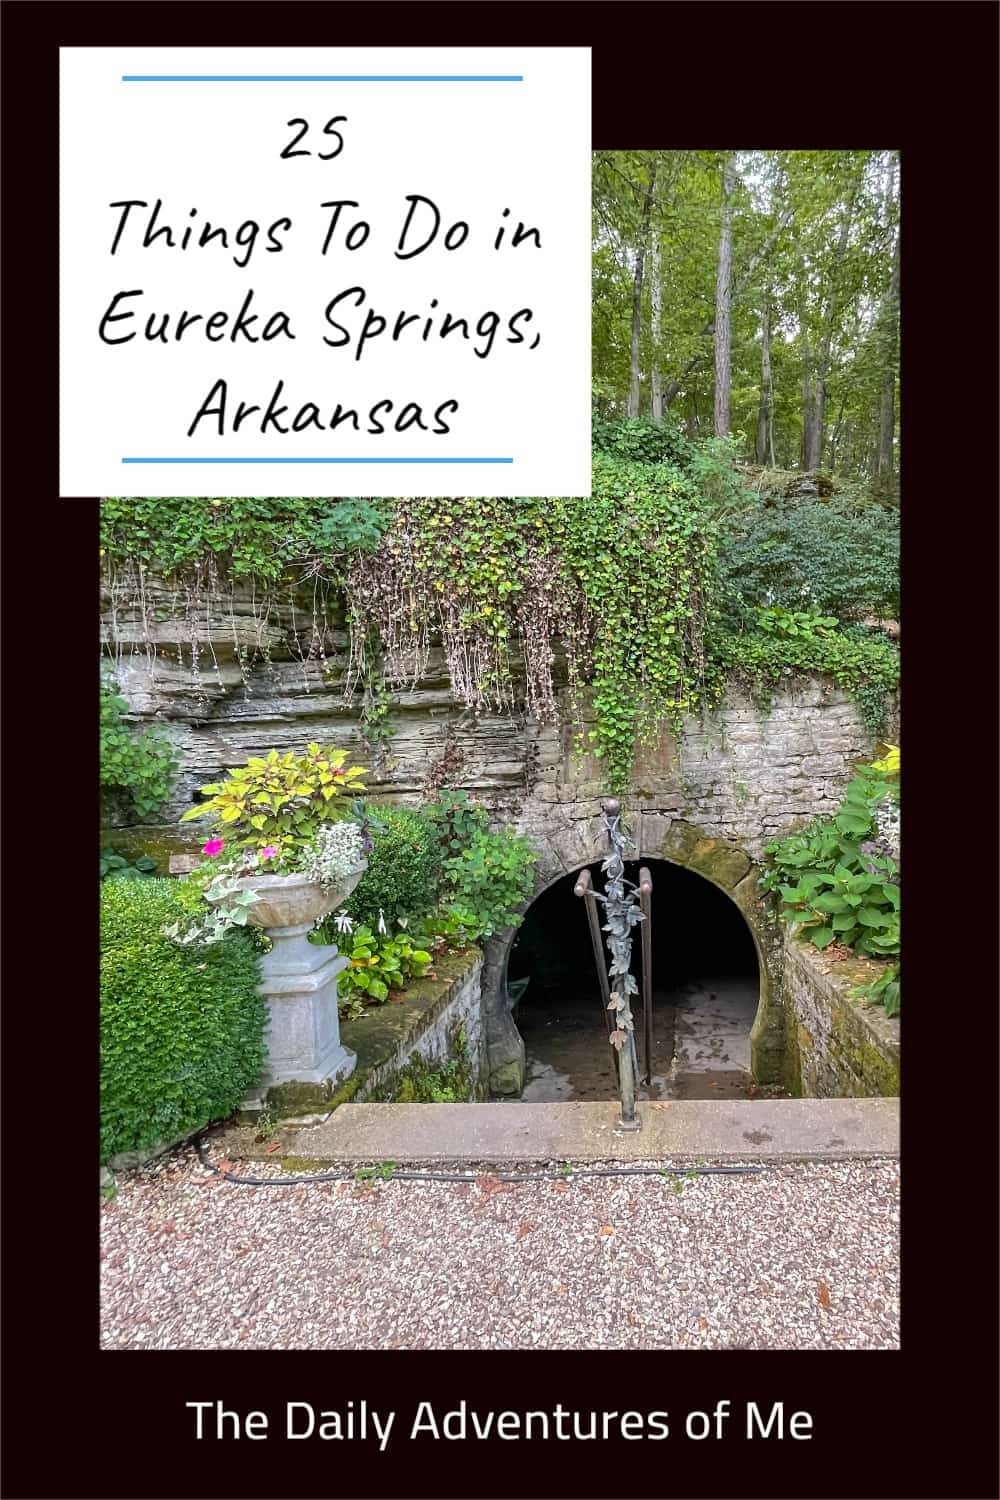 A bohemian town full of decorated hot springs lies in the Ozark Mountains on the border of Arkansas and Missouri. Explore all the interesting things you can find in Eureka Springs, Arkansas. #hosted @crescenthotel @Eurekasprings #CharmingUSTowns